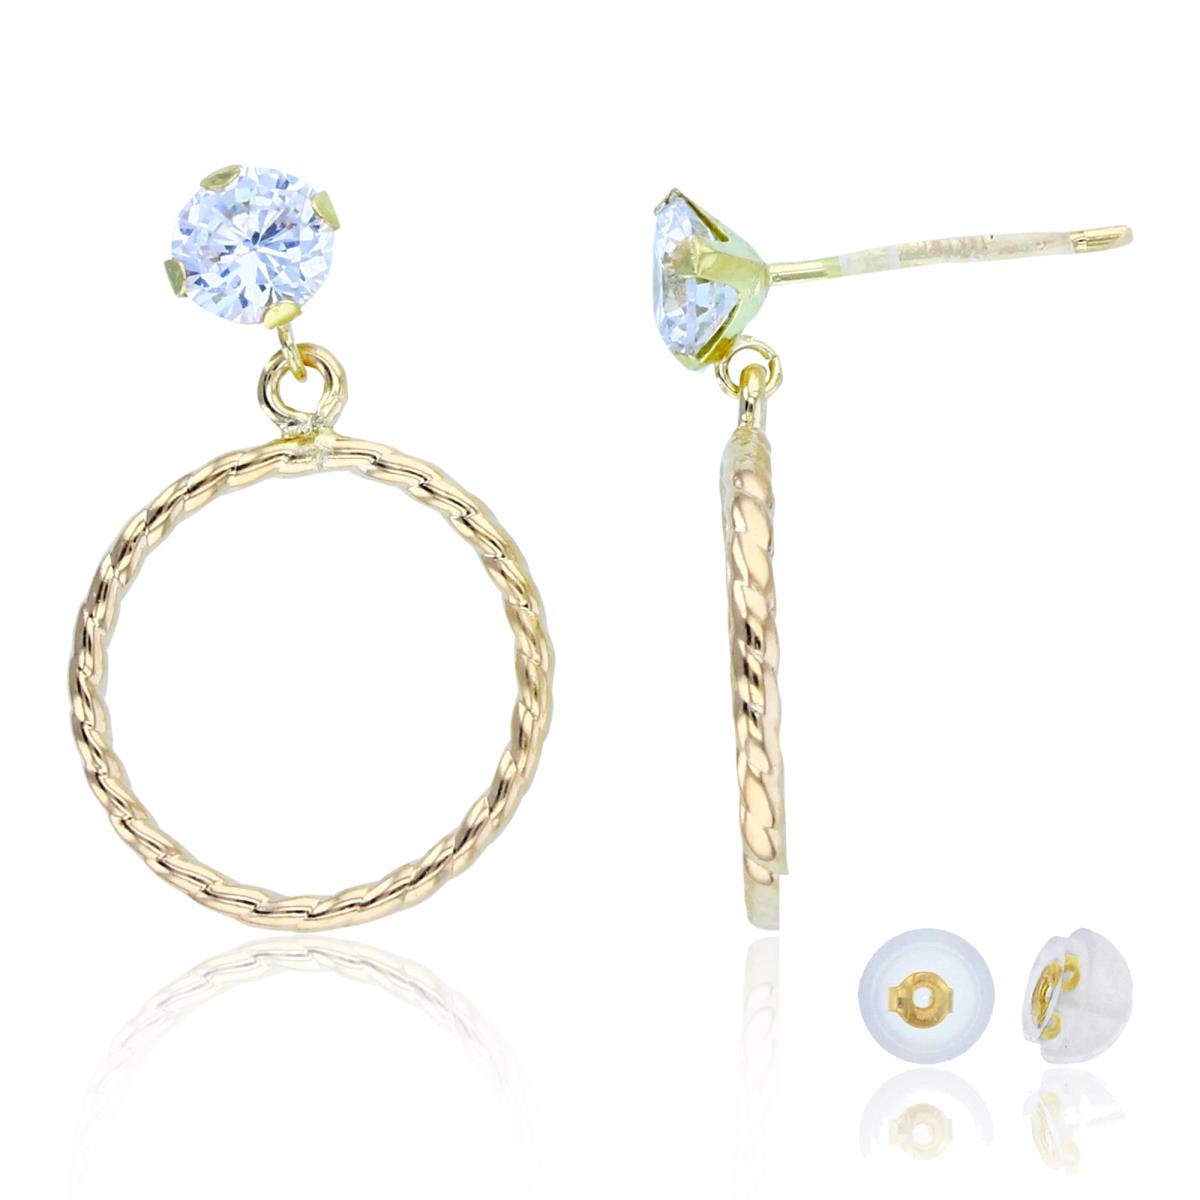 10K Yellow Gold 4mm Rnd CZ Top & Open Twist Circle Dangling Earrings with Silicon Backs